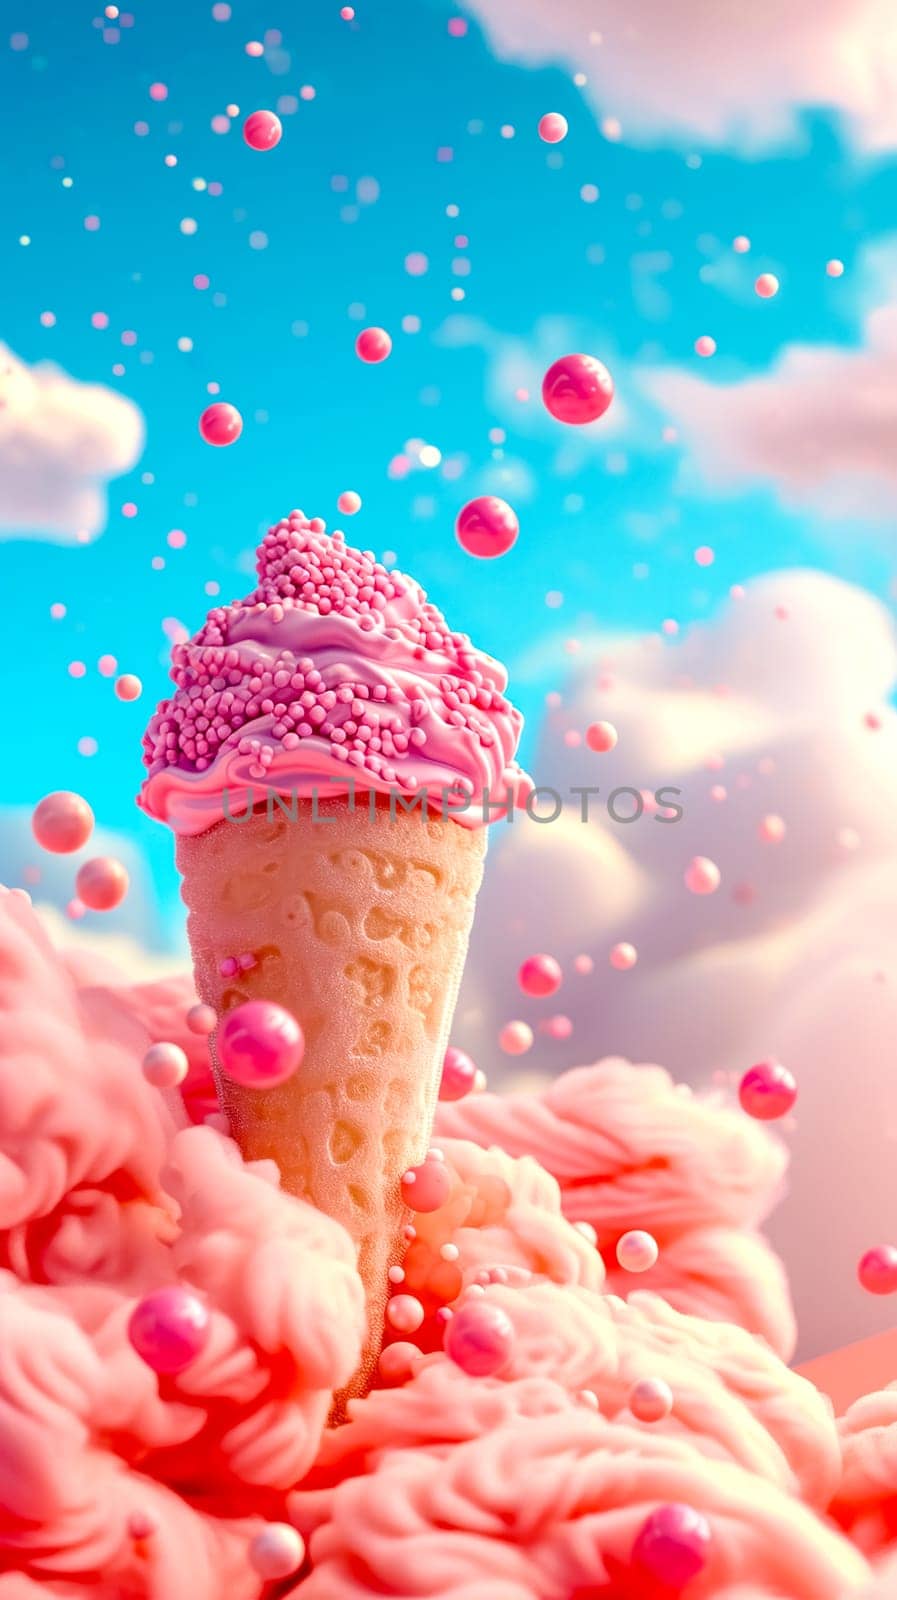 pink ice cream cone adorned with various embellishments, set against a backdrop of fluffy pink clouds and falling beads by Edophoto